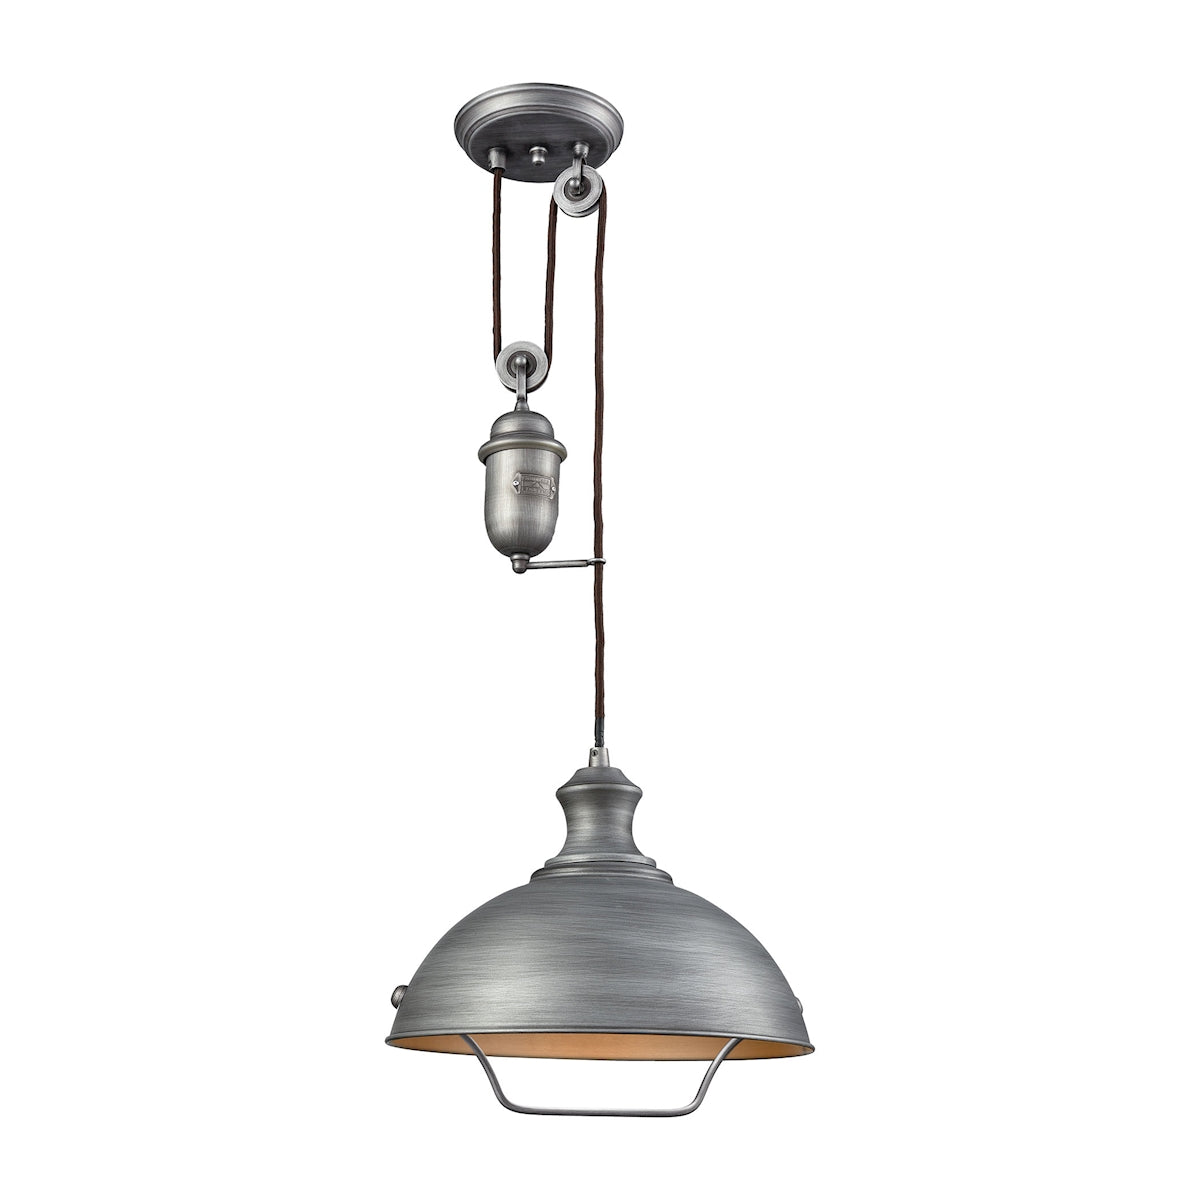 ELK Lighting 65161-1 Farmhouse 1-Light Adjustable Pendant in Weathered Zinc with Matching Shade